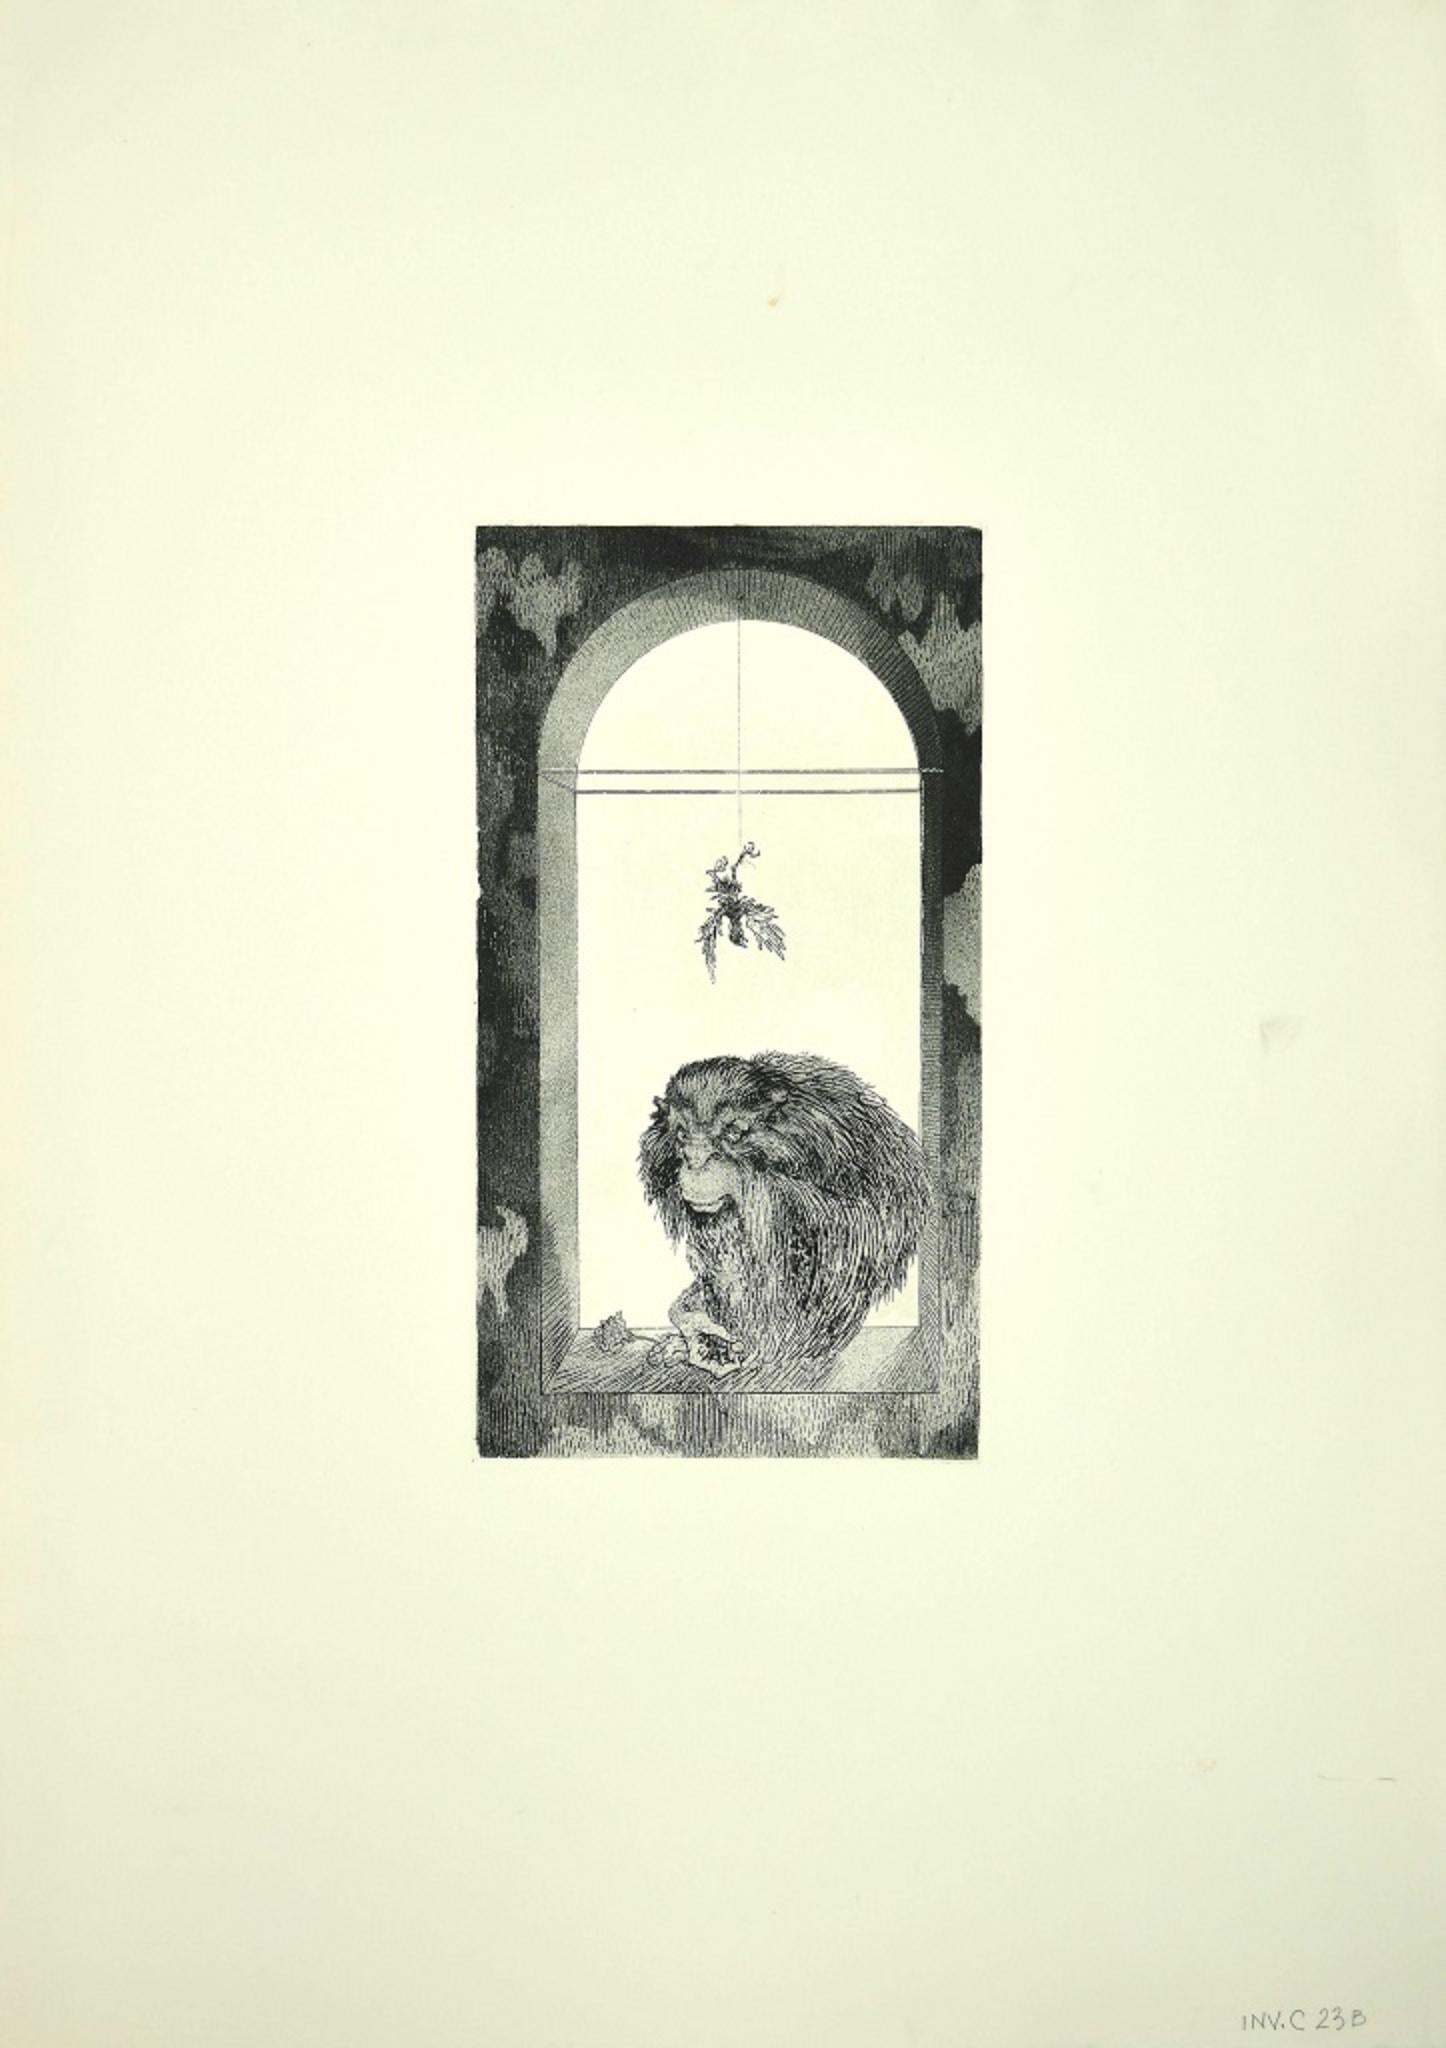 The Monkey - Etching by Leo Guida - 1970s